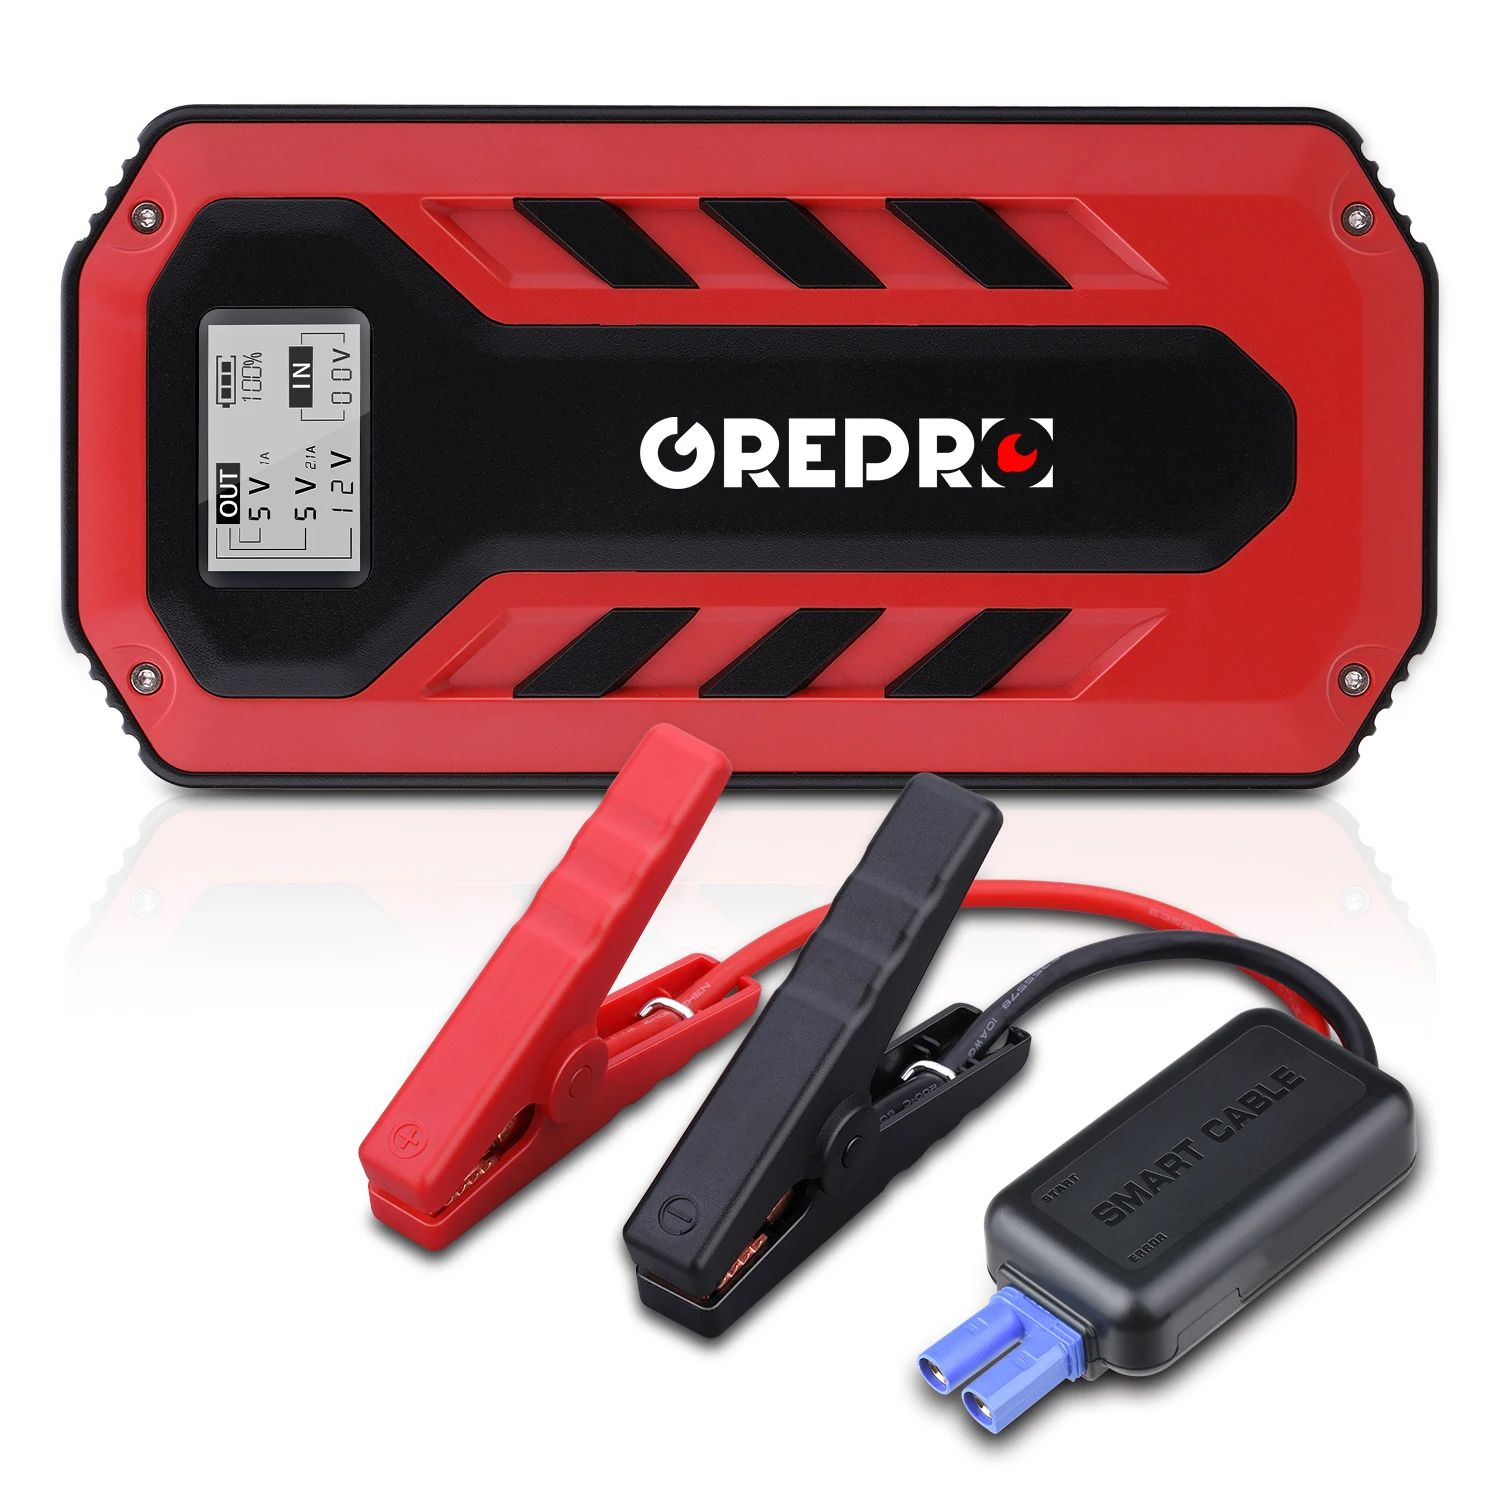 GREPRO Portable 13800mAH Car Jump Starter 1000A Peak 12V Auto Battery Booster Portable Power Pack with LCD Display Jumper Cable